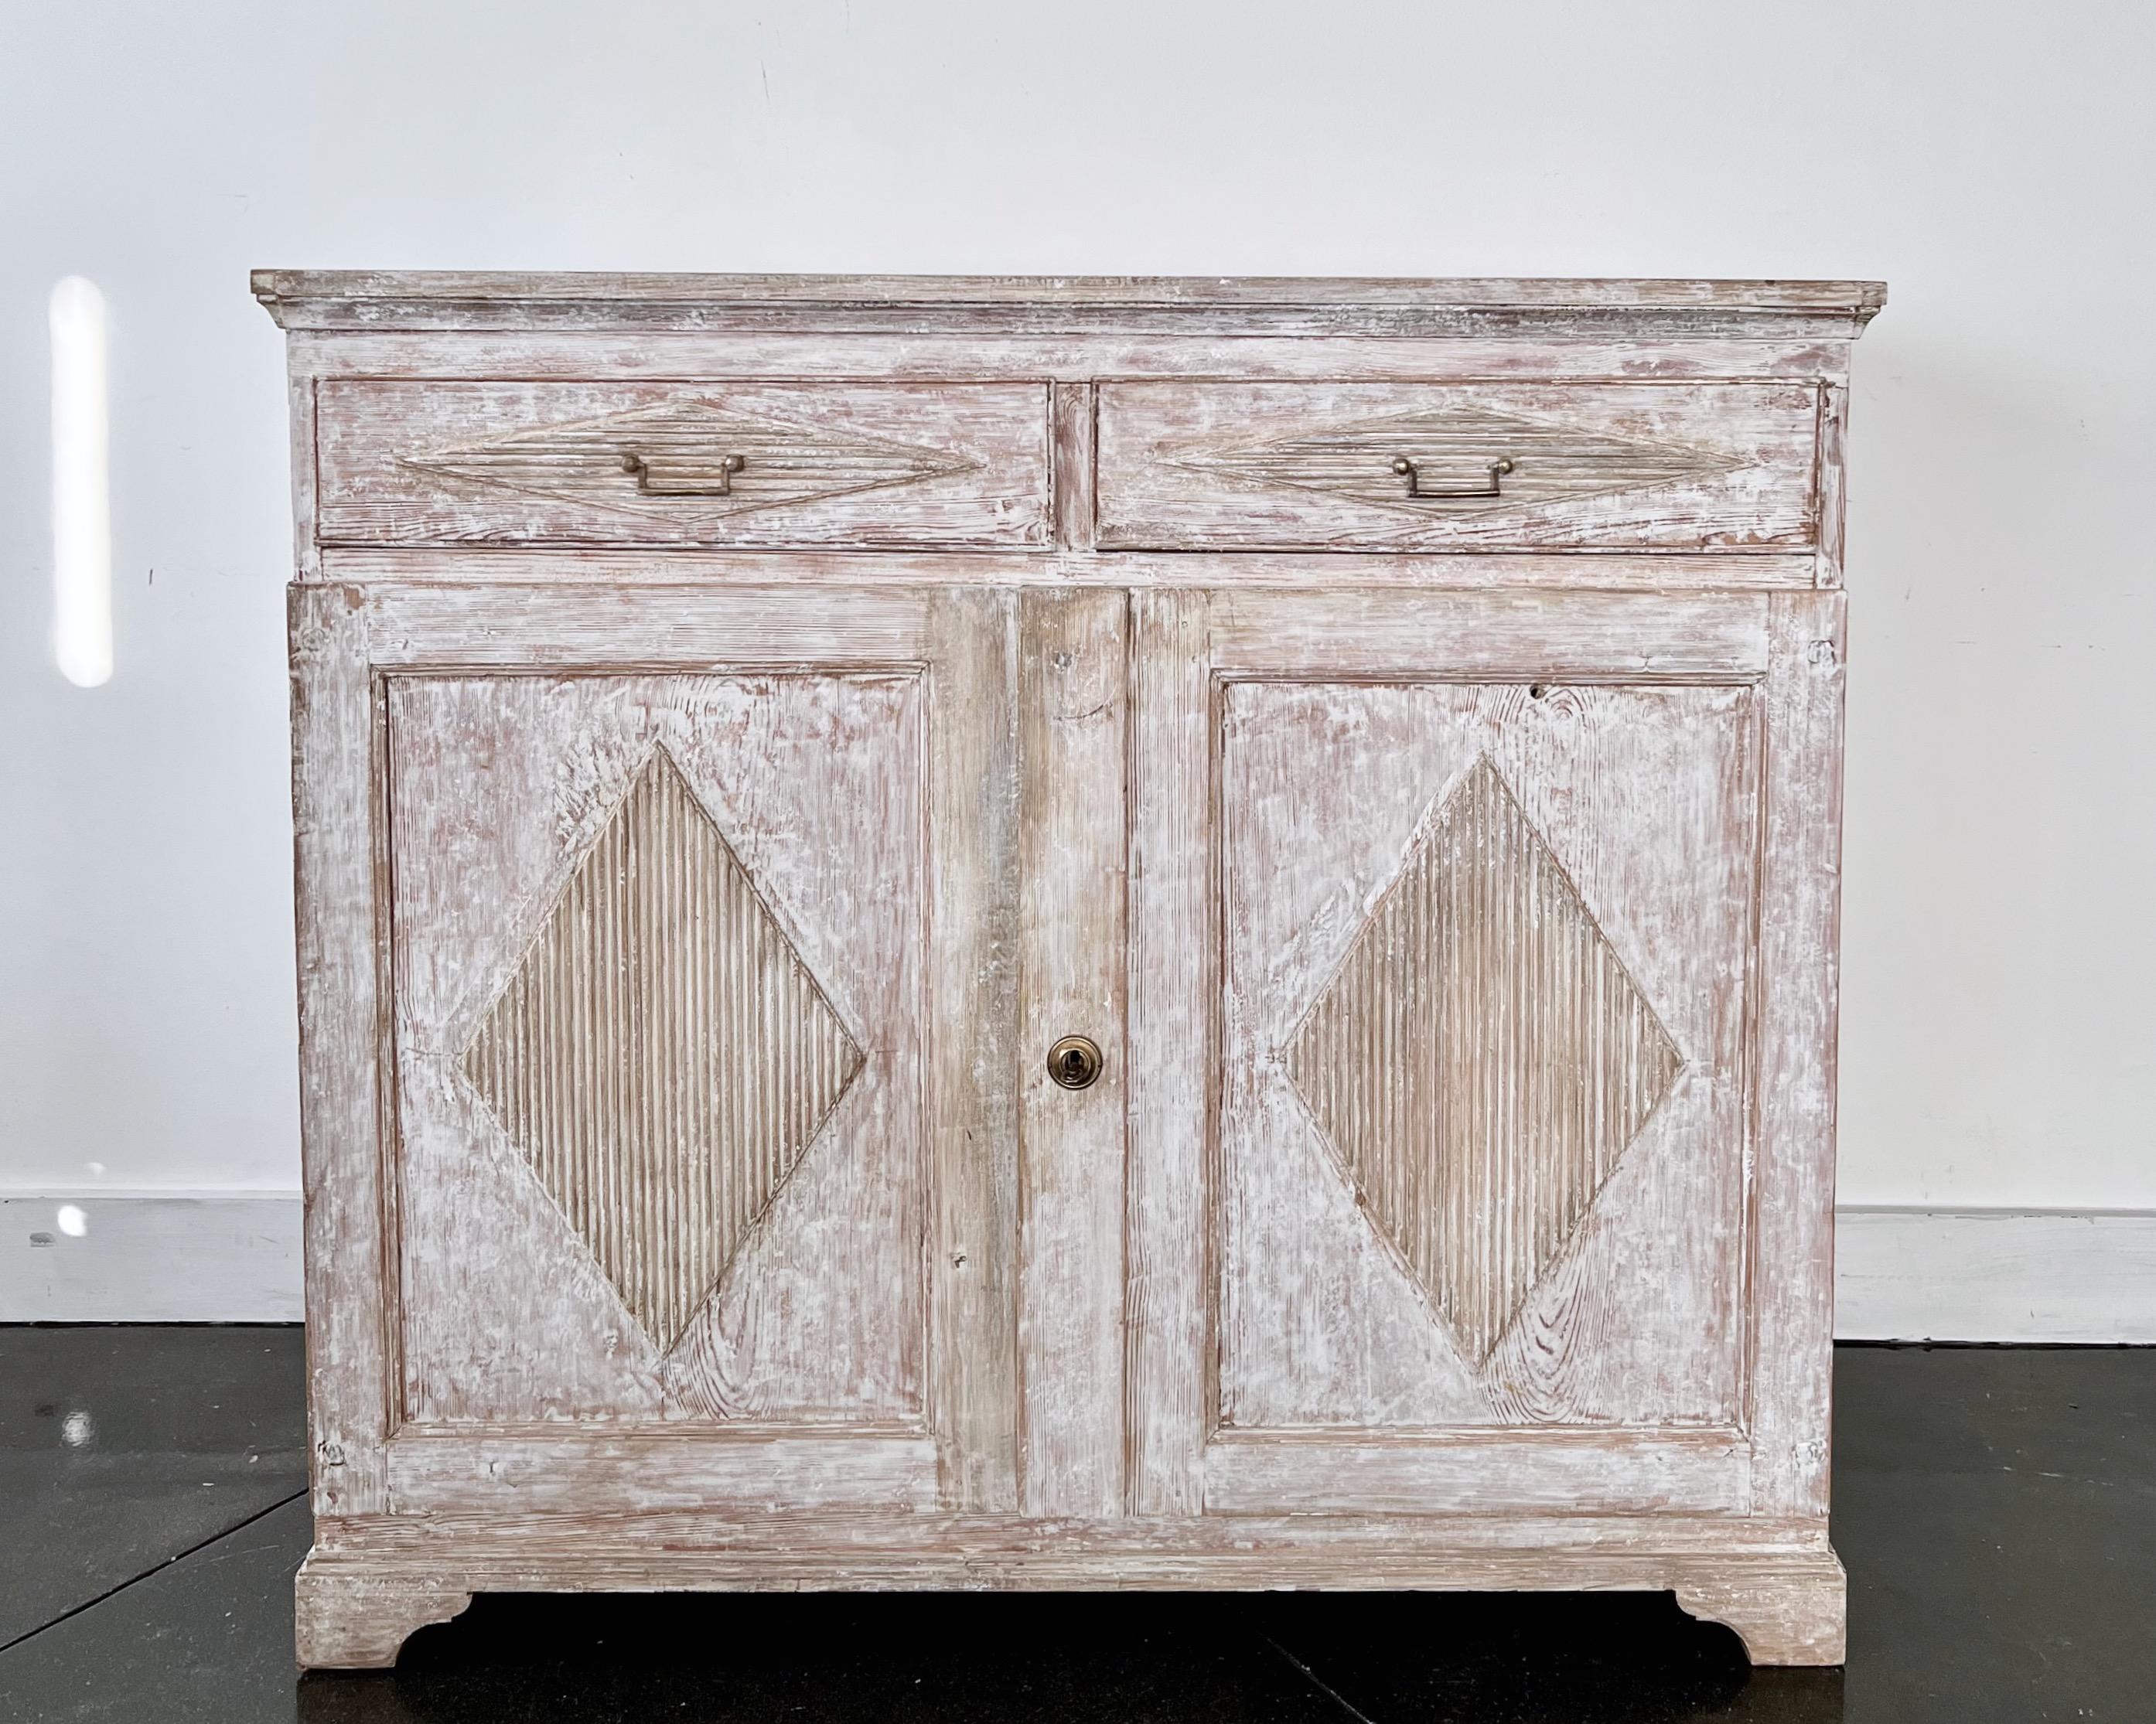 A richly, exclusively carved Swedish Gustavian period sideboard has reeded paneled doors and drawers with central diamond shape lozenges in hand scraped patina - in classic Gustavian manor. This antique sideboard offers plenty of practical storage